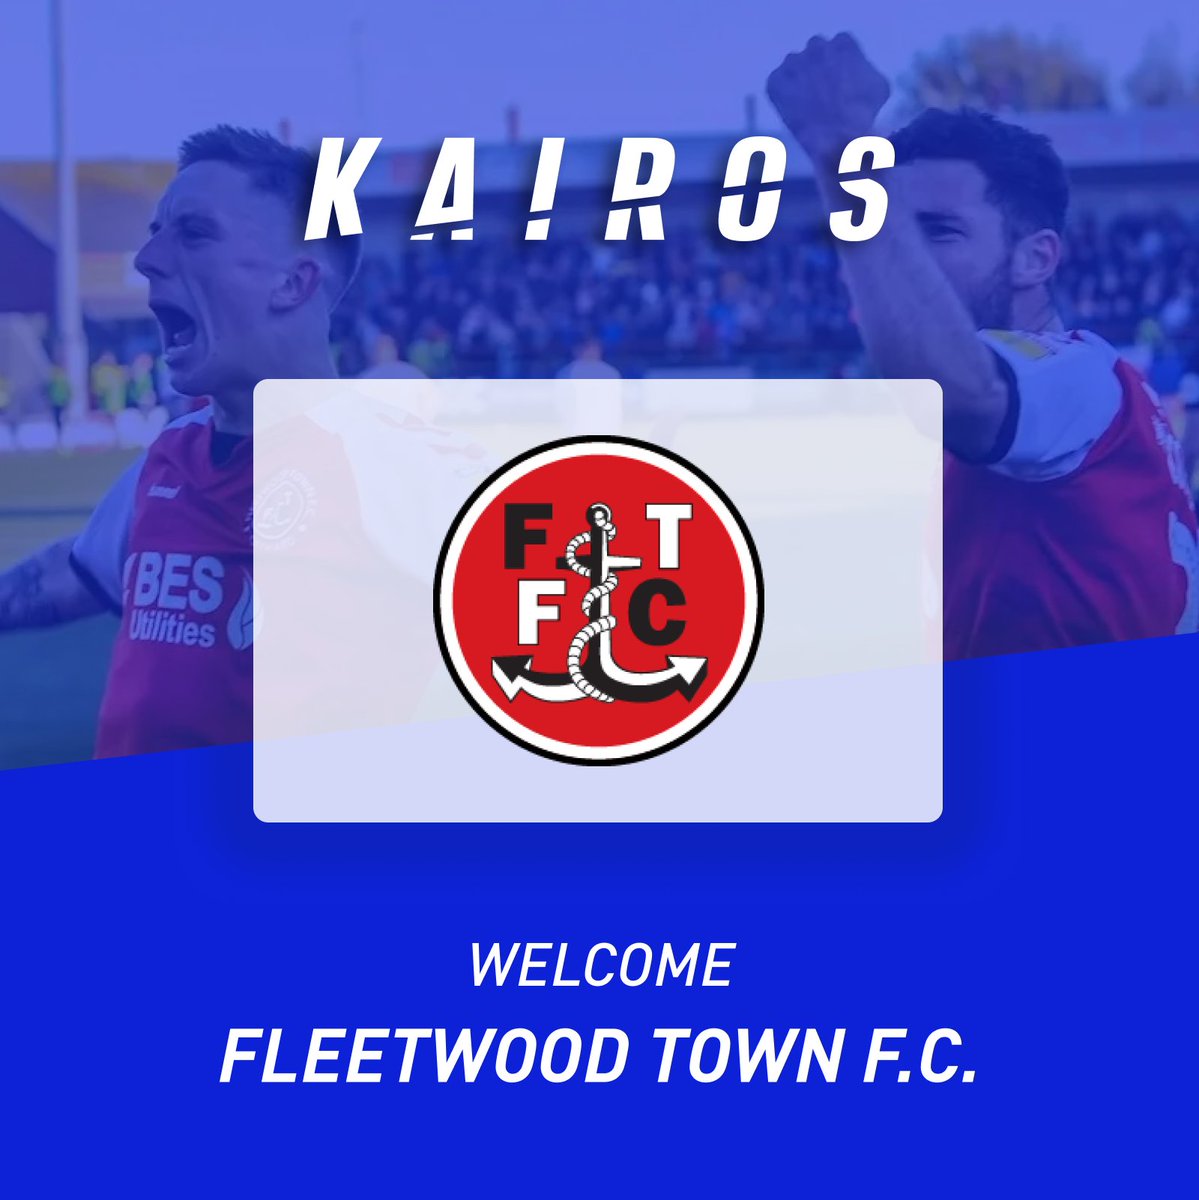 Join us as we welcome Fleetwood Town FC 🙌 We're delighted to share the Kairos system will be used for all Team Operations & Communication! To learn more, drop us a message 🤝